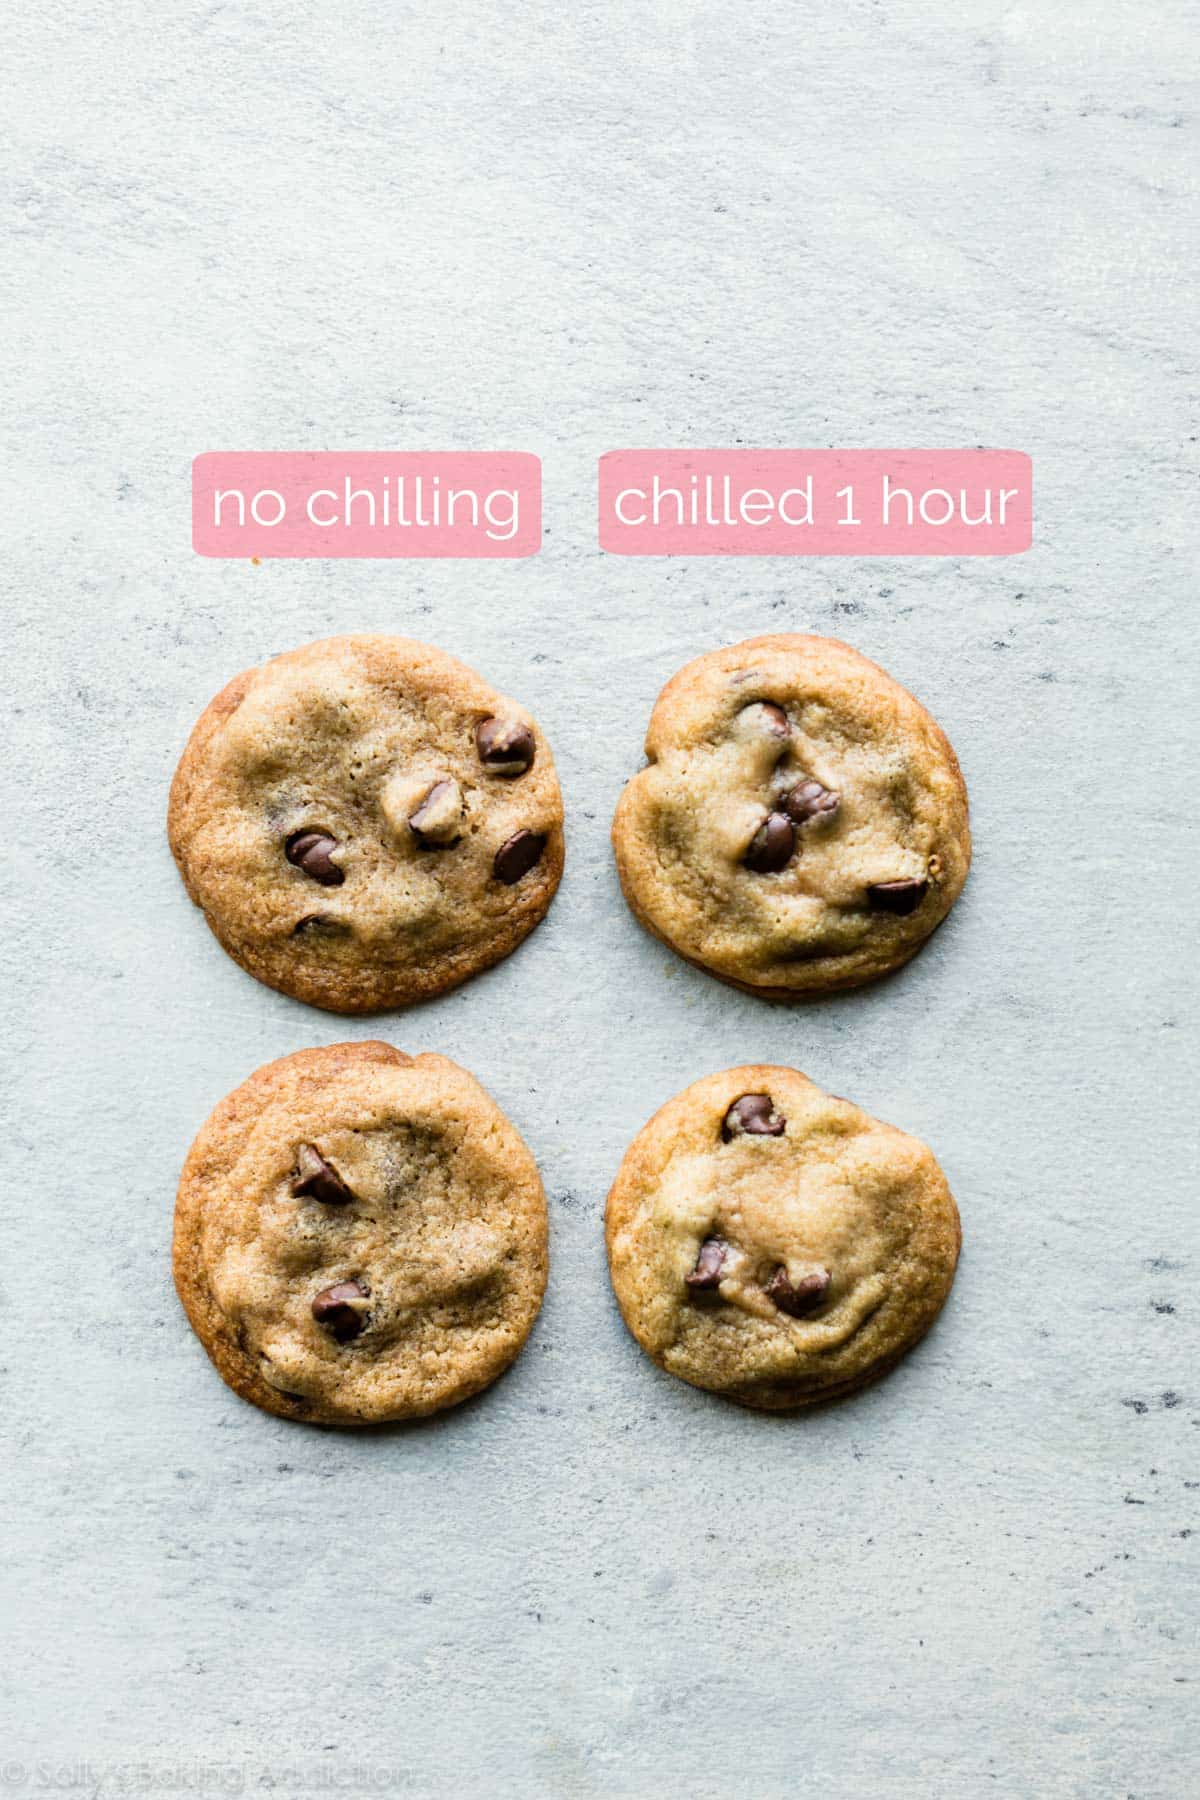 4 chocolate chip cookies showing the difference between not chilling and chilling the cookie dough